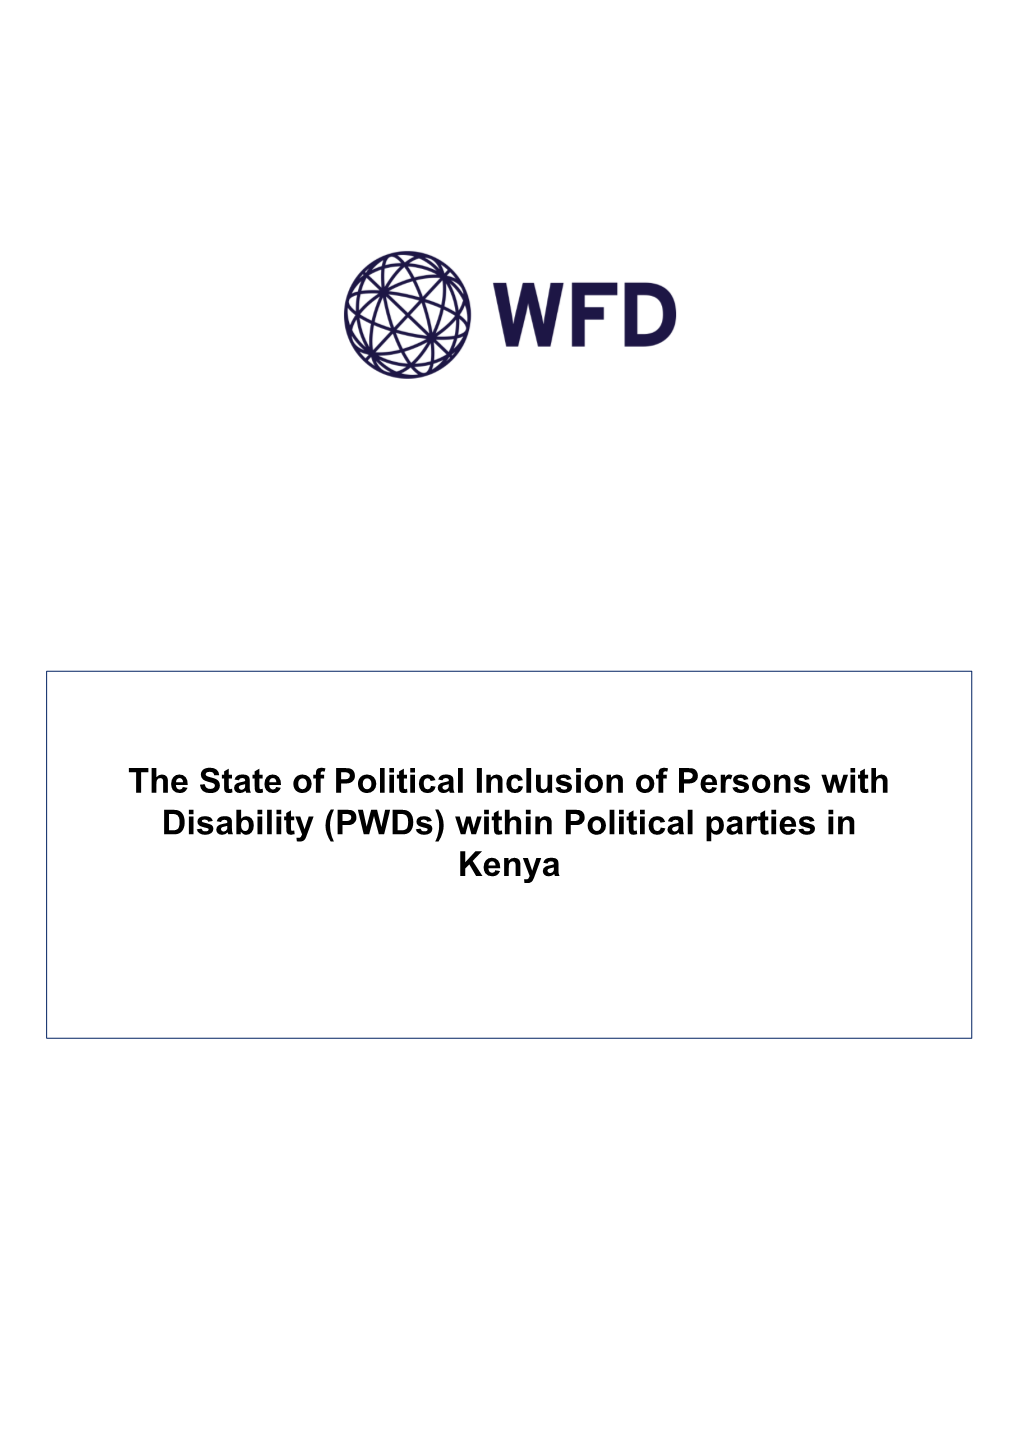 (Pwds) Within Political Parties in Kenya